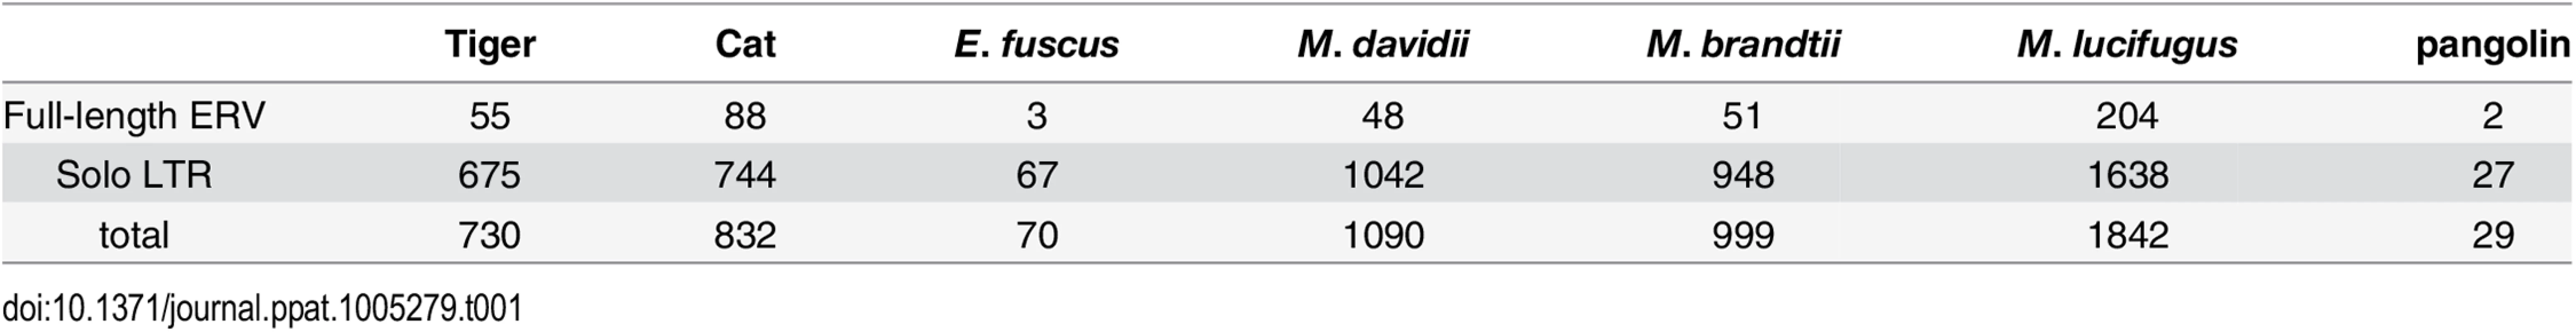 Copy number of MLERV1 related proviruses in different species.